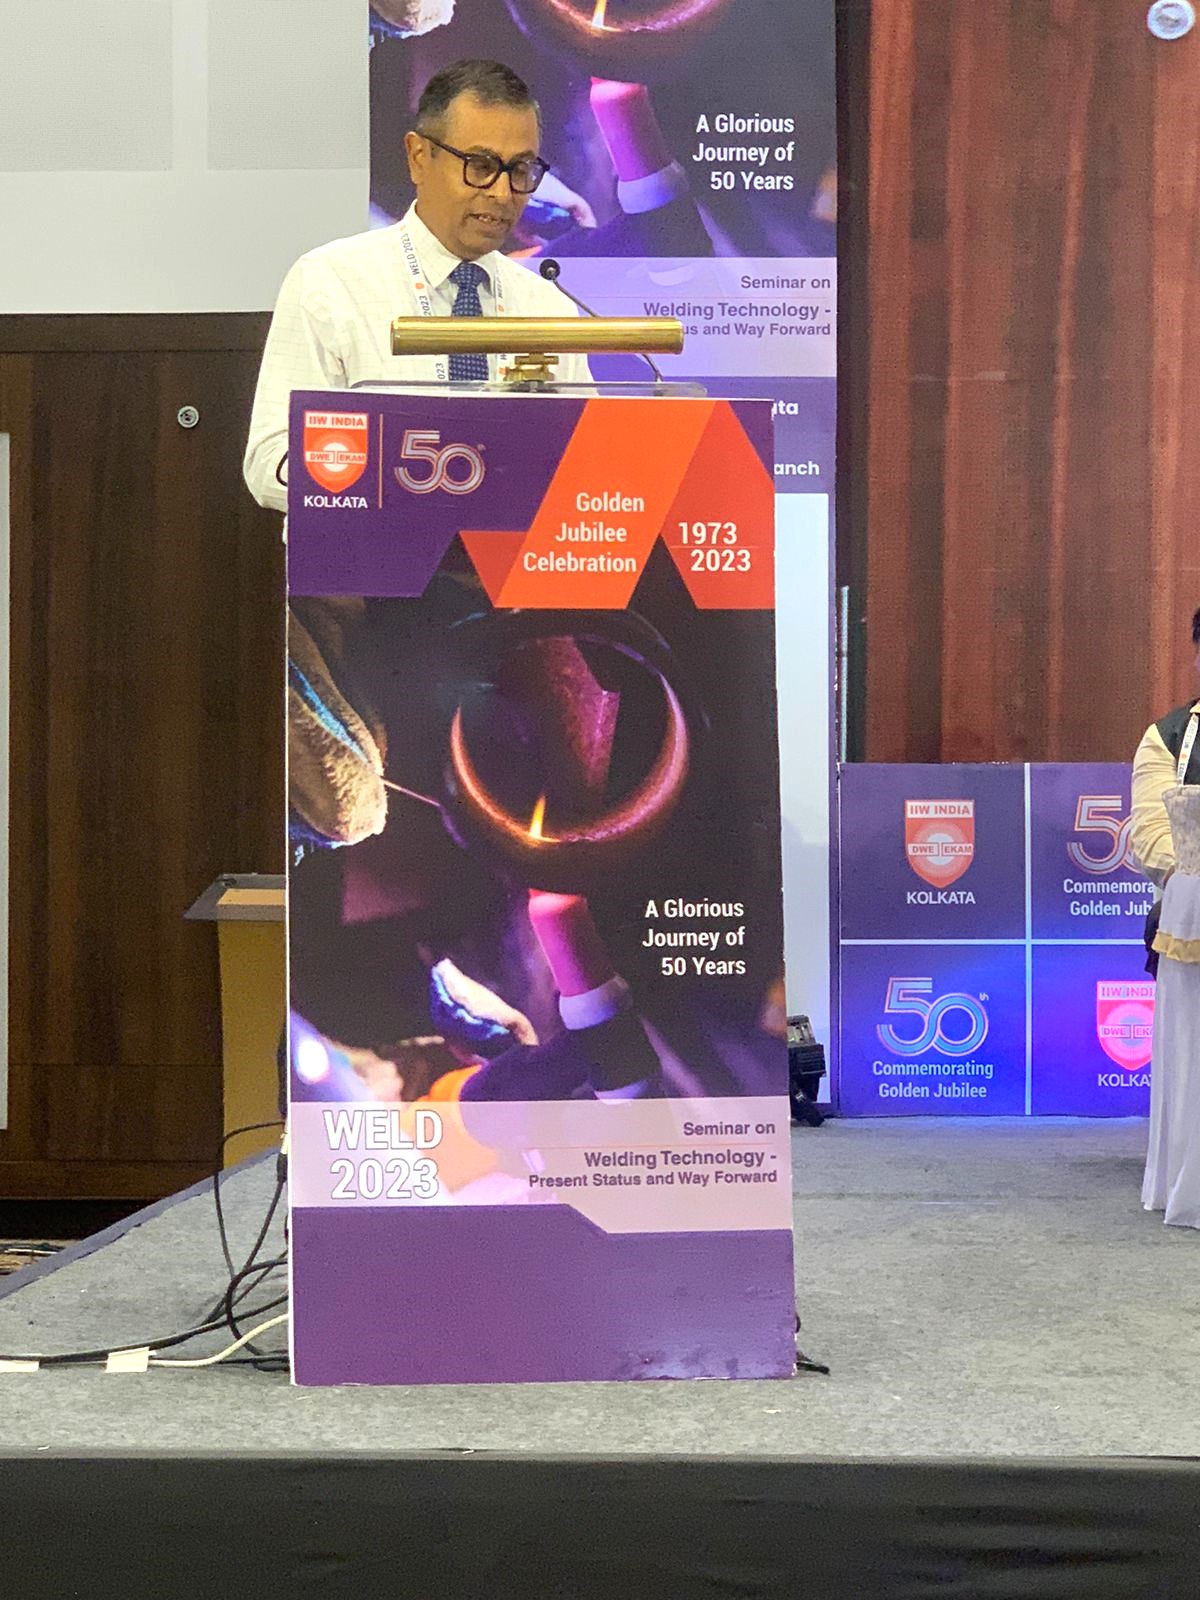 Image 2 - Inaugural Address by Cdr B Sengupta IN (Retd.),CGM(MW) at Golden Jubilee Seminar of Indian Institute of Welding, Biswa Bangla Convention Centre on 11 Mar 23